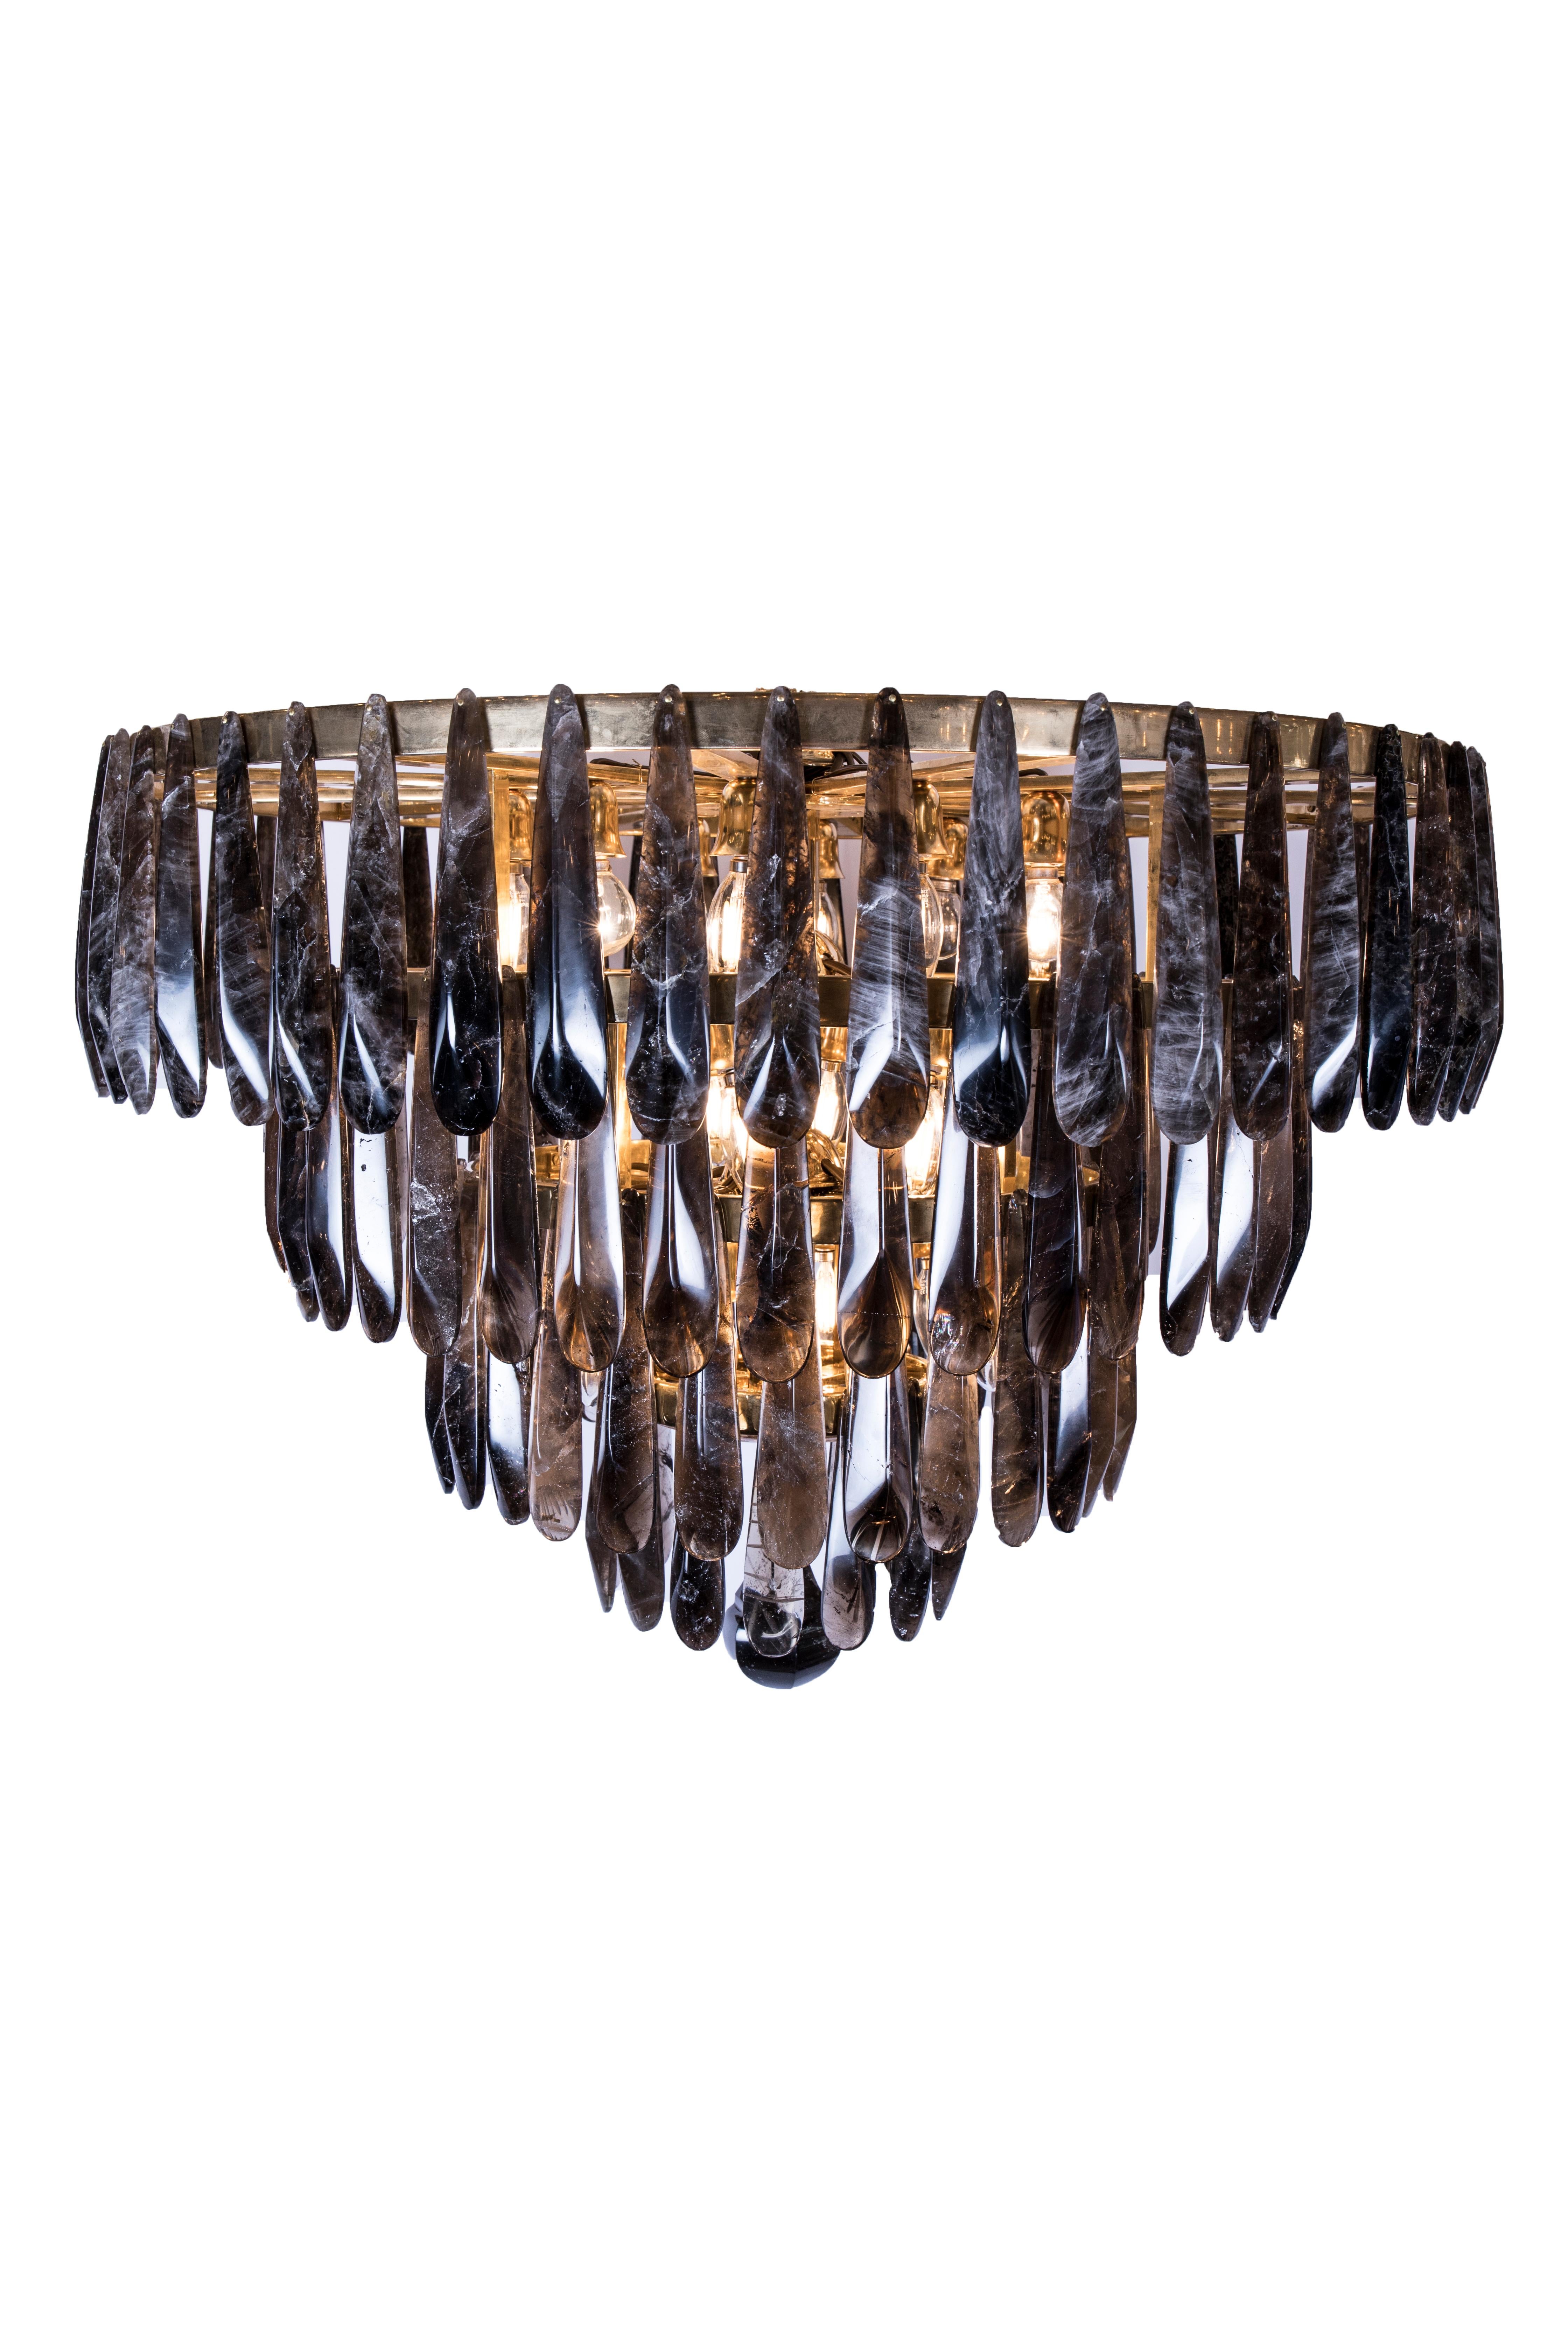 A spectacular and unusual pair of smoked rock crystal chandeliers comprising 4 bronze circular reducing tiers each profusely hung with a total of 135 individually hand carved smoked rock crystal drops. A beautiful solid smoked rock crystal pear drop